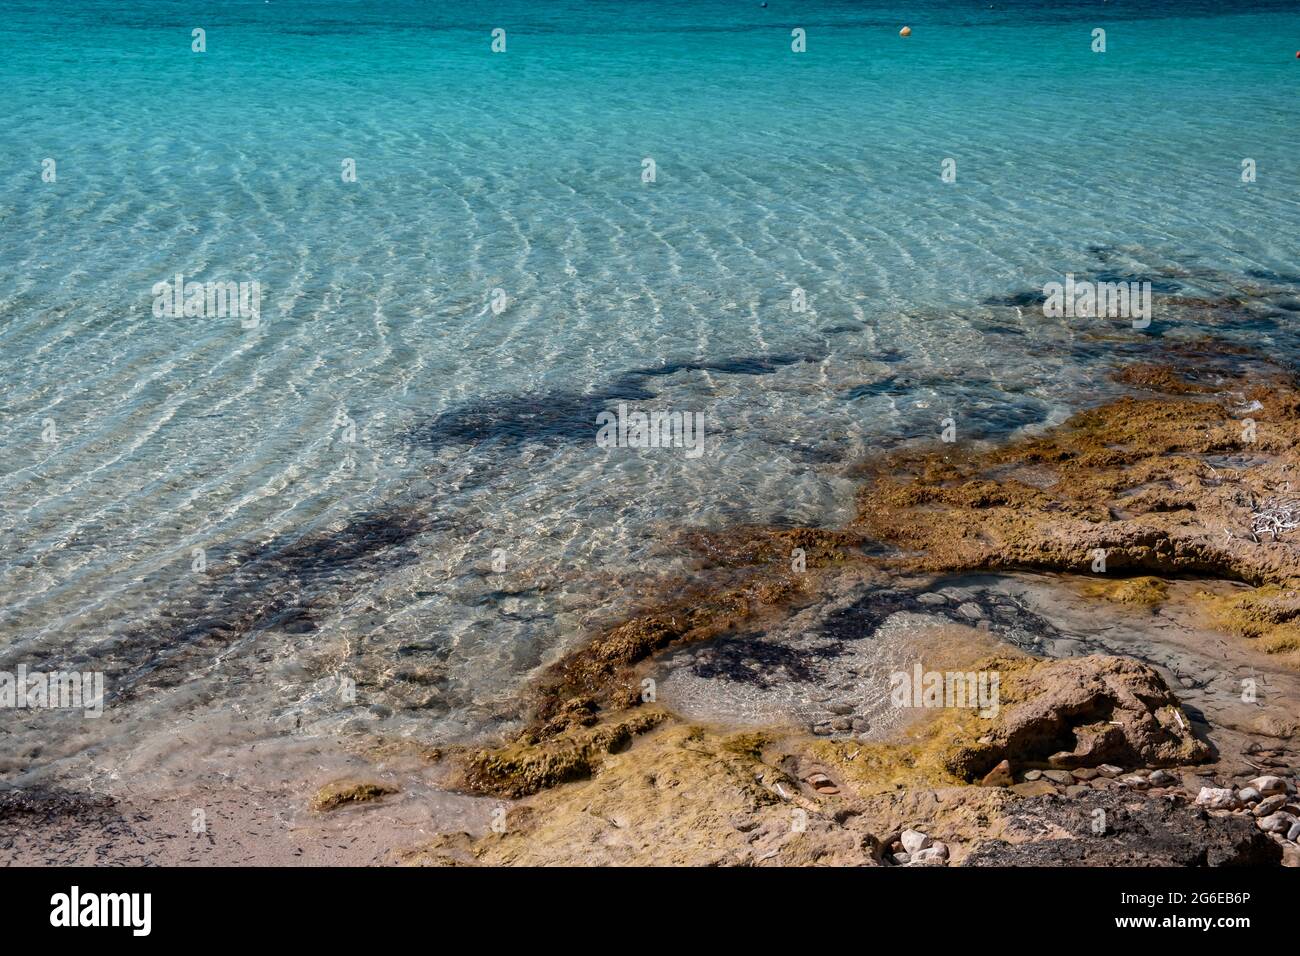 Calm sea surface, small ripples on rough shore, shallow water. Turquoise blue color water, sandy seabed and rocky coast, Summer holidays at a paradise Stock Photo